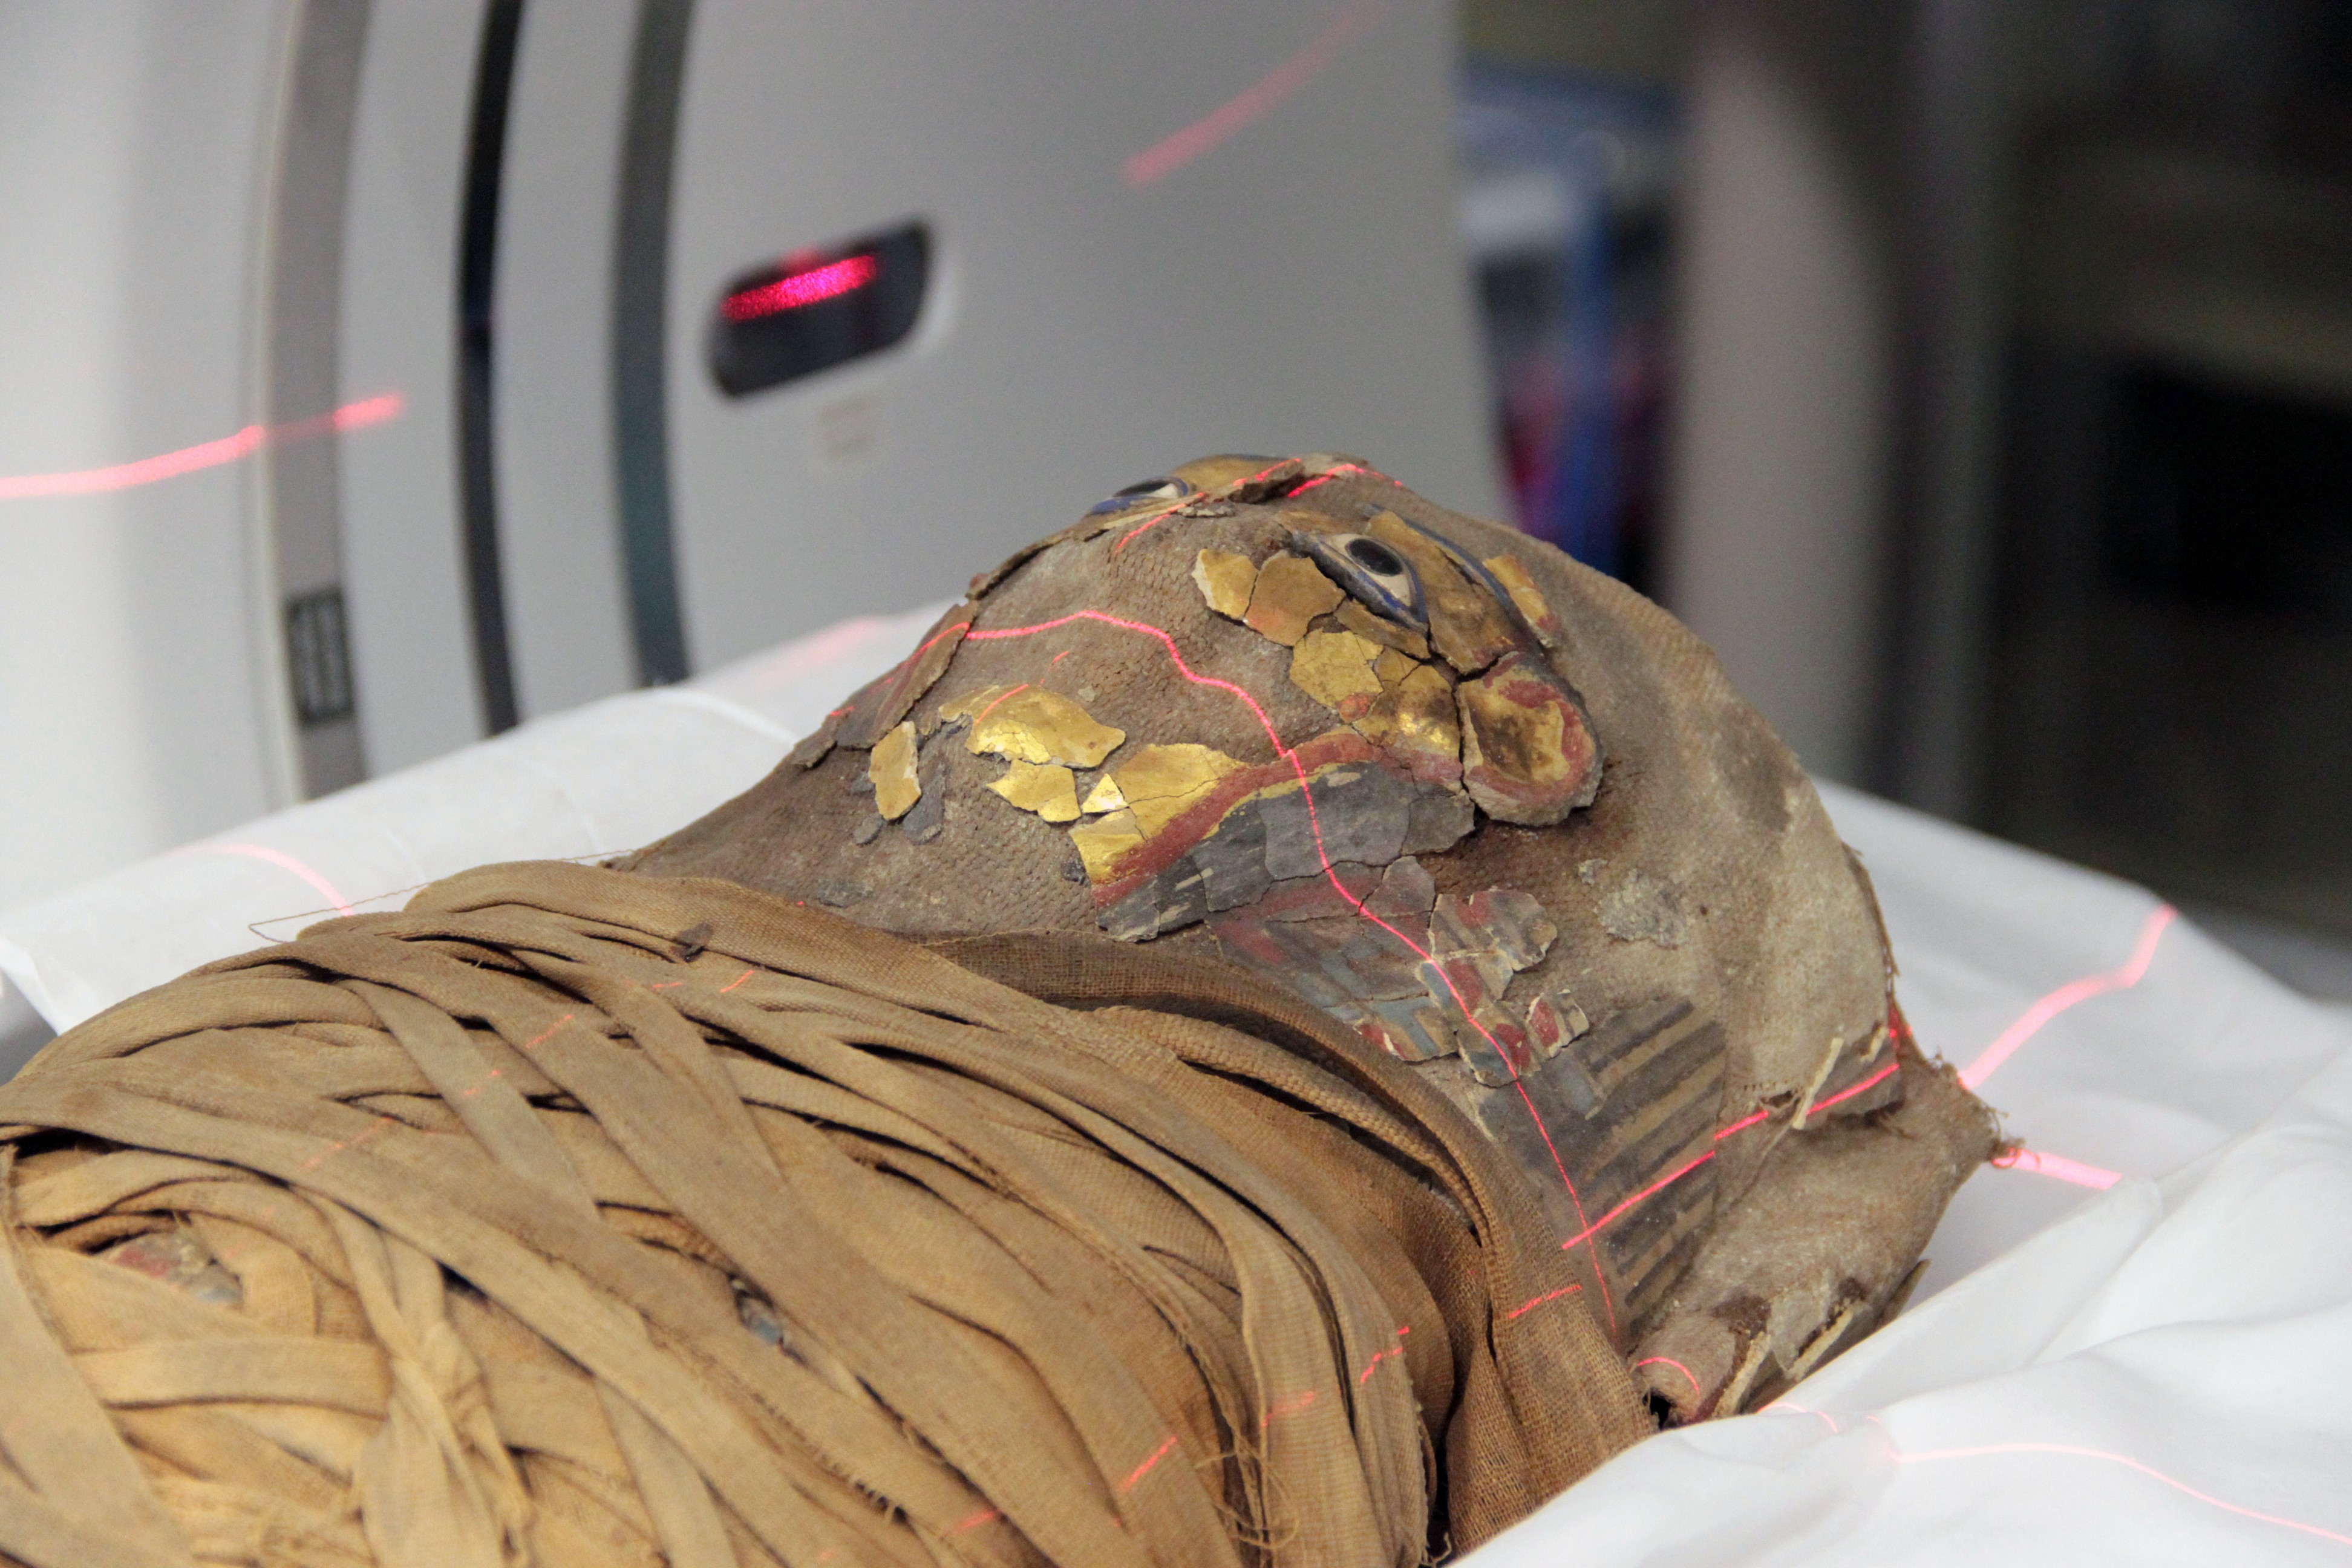 The CT scan on a toddler mummy revealed that she may have died from a ruptured appendix.